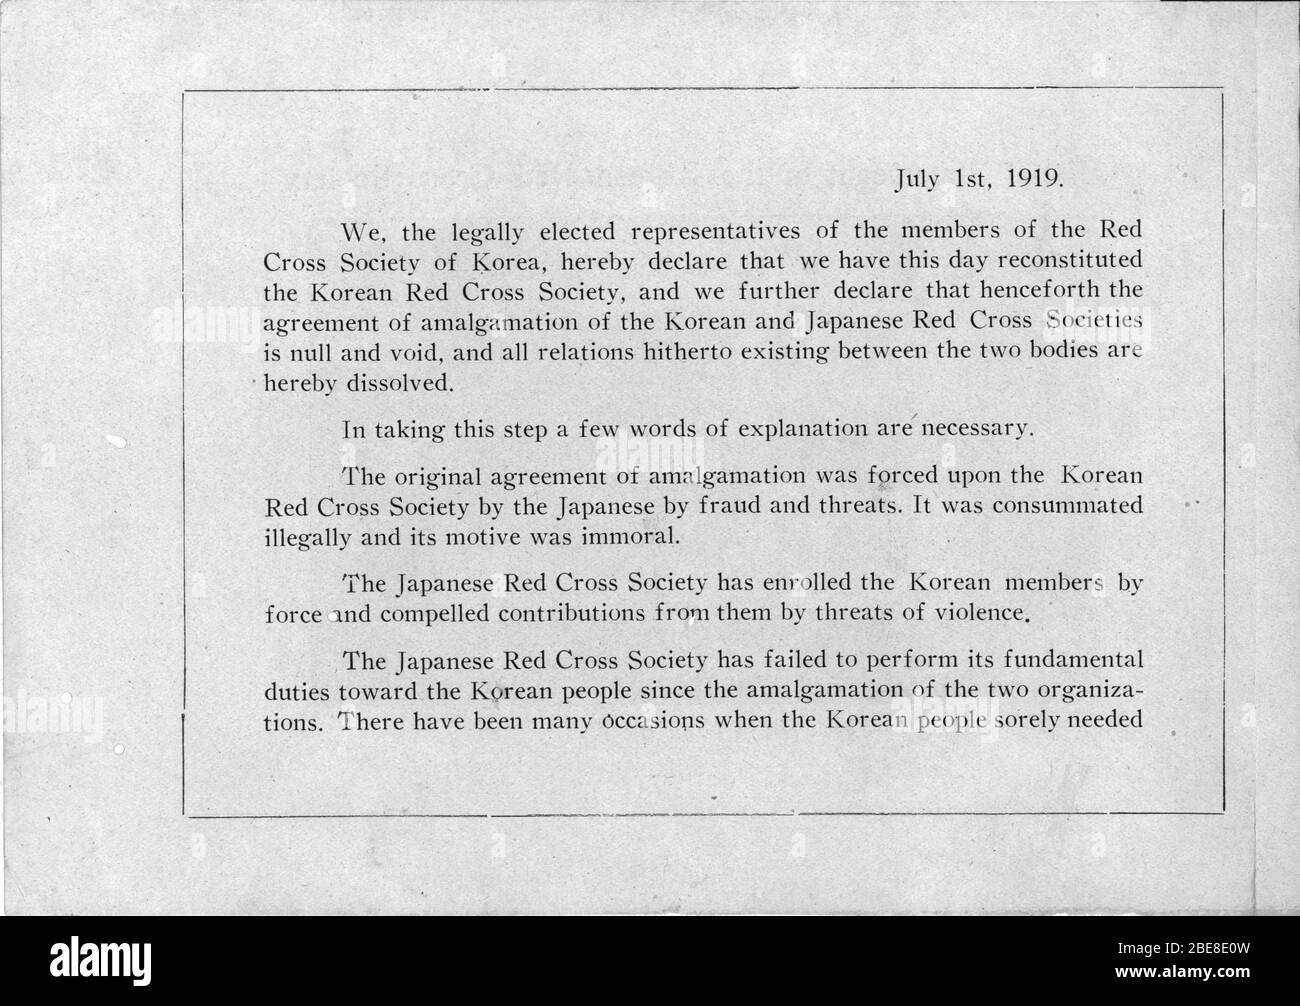 'English:  [Red Cross pamphlet on March 1st Movement] Item abstract: Declaration of Independence and photos exposing Japanese soldiers' brutality; Volume abstract: Hyon Sun's biographical poems,  photos, a Declaration of Independence and  booklet exposing Japanese soldiers' brutality.; Original version of Filename: KADA-shyun15-0121; KADA-shyun15-0122; KADA-shyun15-0123; KADA-shyun15-0124; KADA-shyun15-0125; KADA-shyun15-0126; KADA-shyun15-0127; KADA-shyun15-0128; KADA-shyun15-0129; KADA-shyun15-01210; KADA-shyun15-01211; KADA-shyun15-01212; KADA-shyun15-01213; KADA-shyun15-01214 Stock Photo